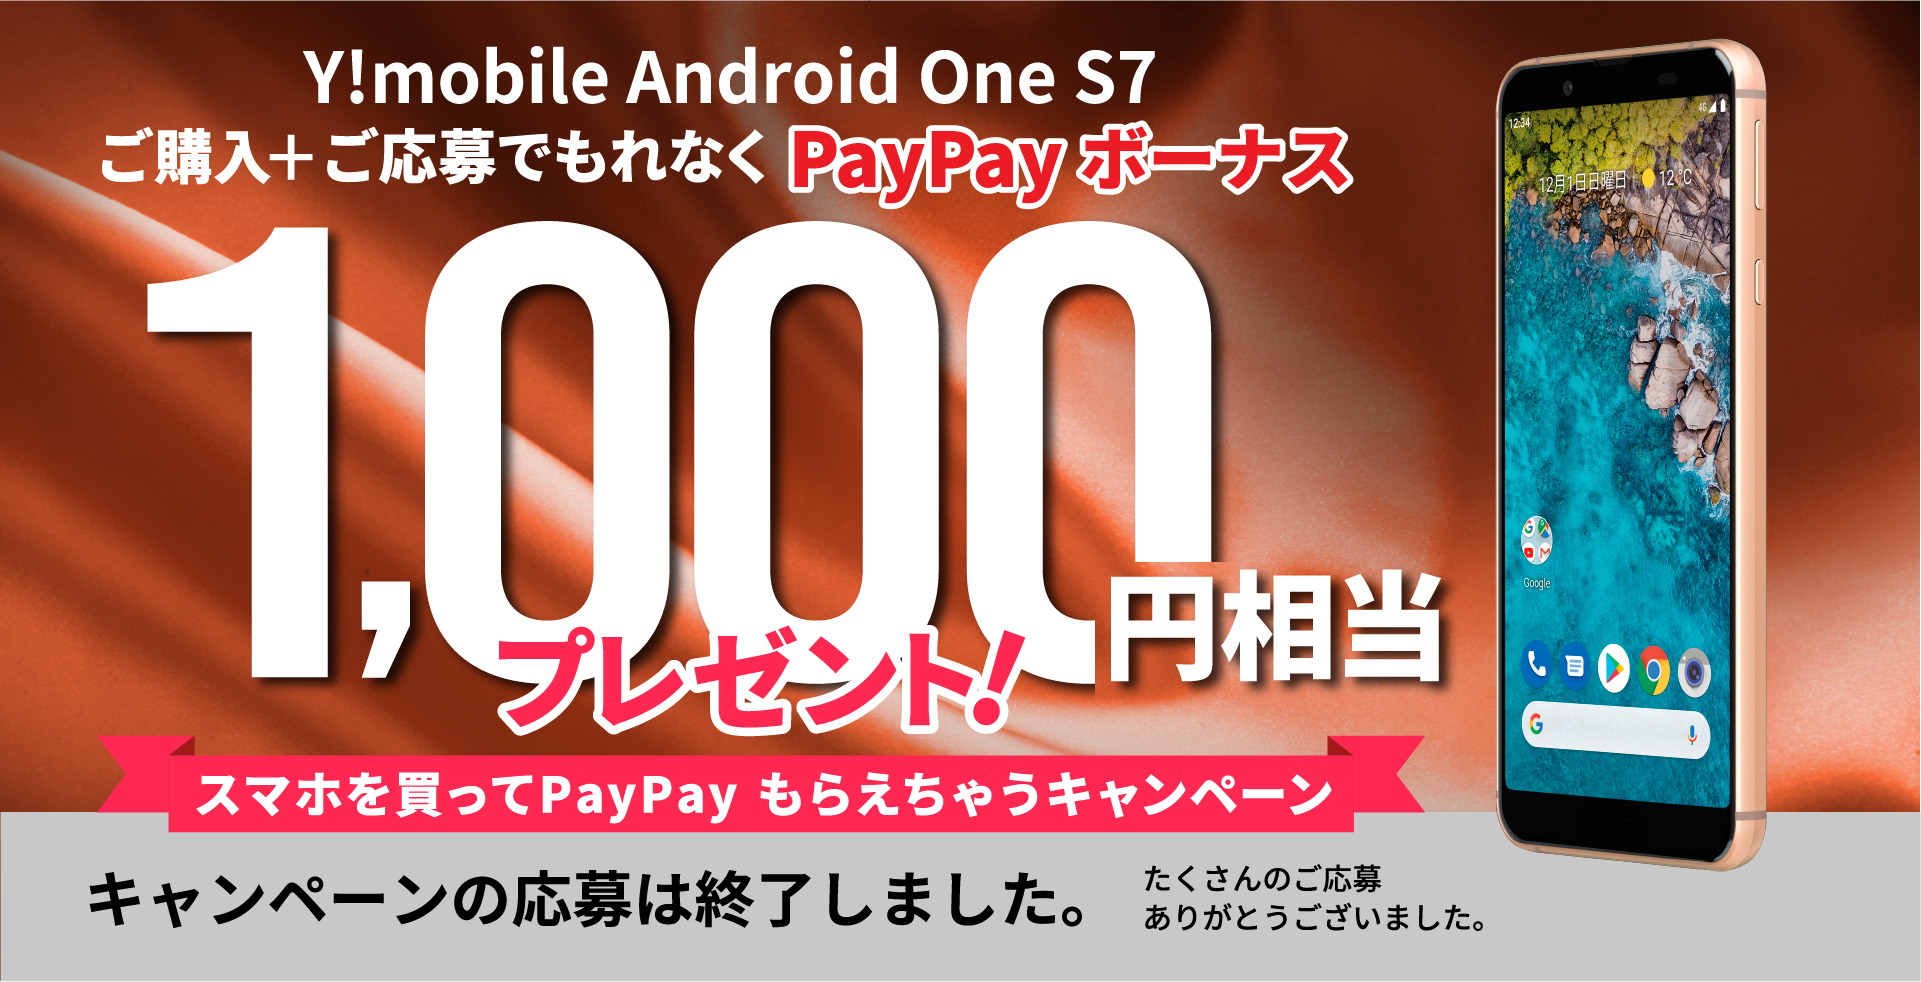 Y Mobile Android One S7 Paypayボーナス 1 000円相当プレゼント Aquos シャープ